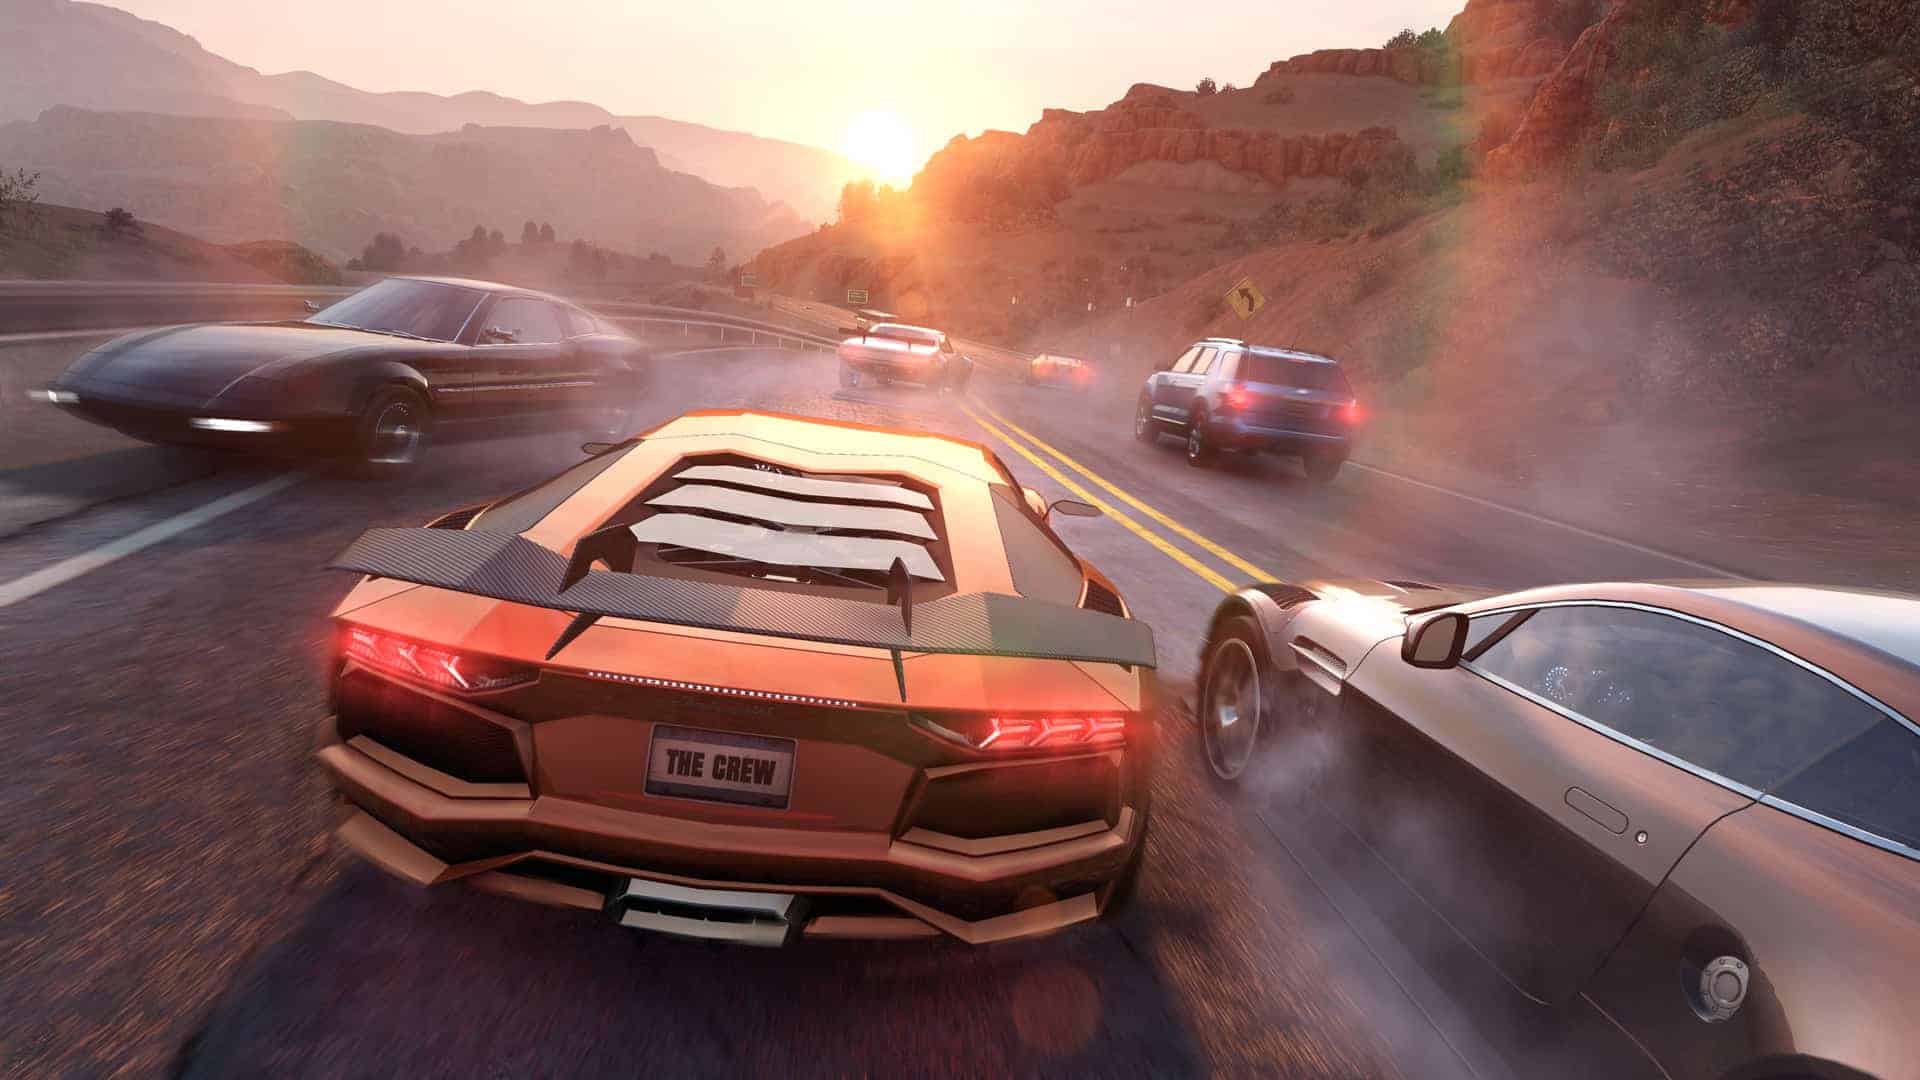 the crew pc download